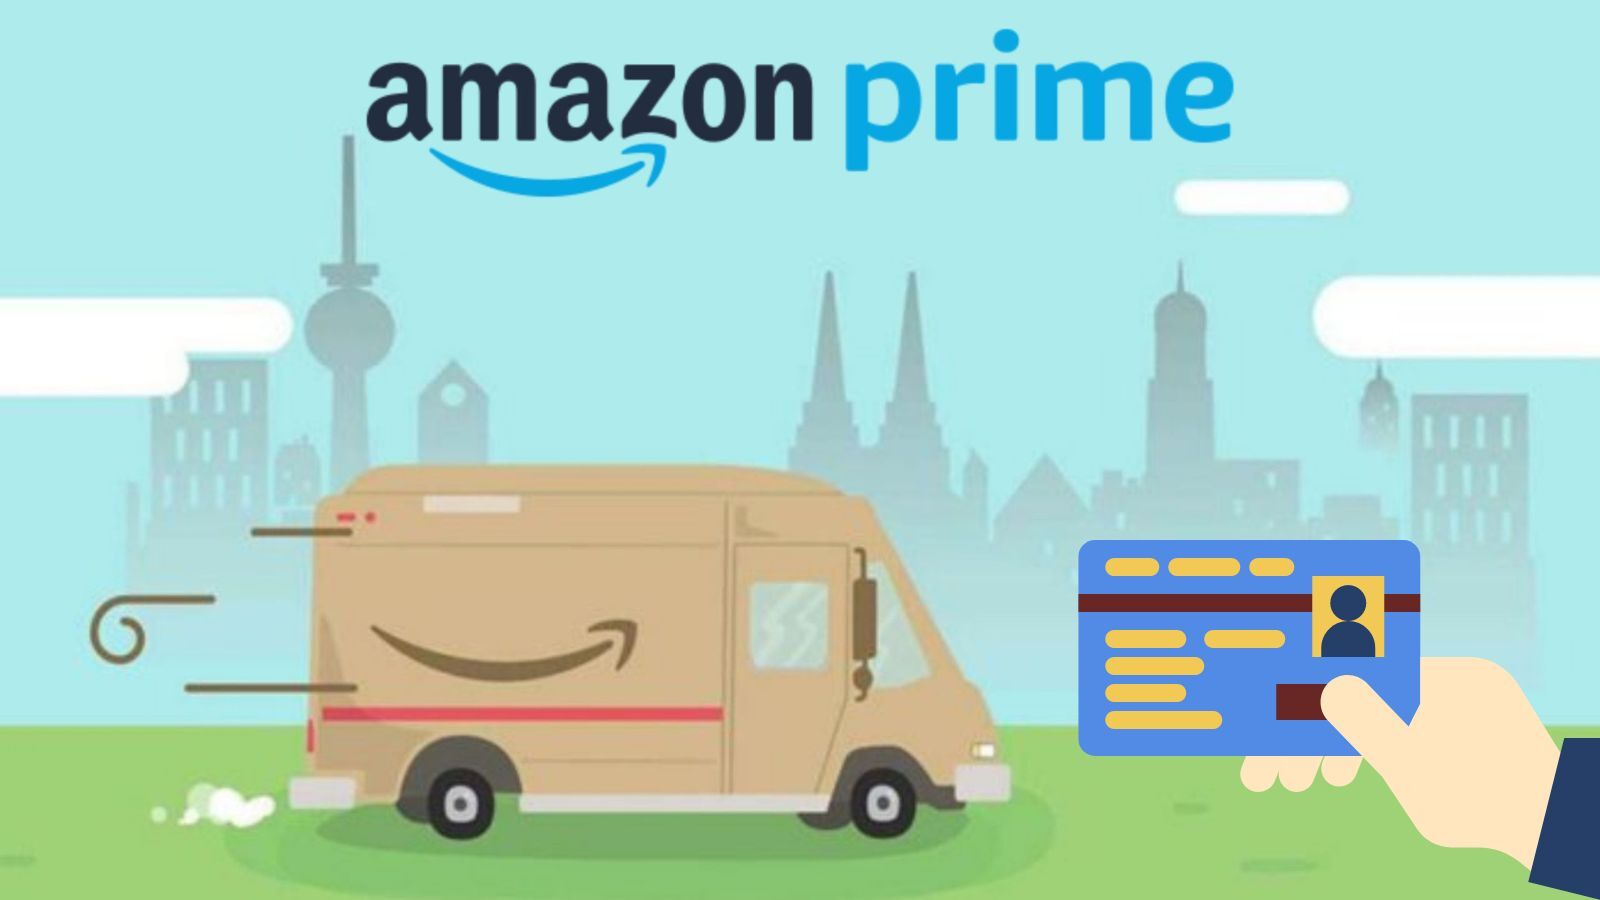 How Do I Know If I Have Amazon Prime?